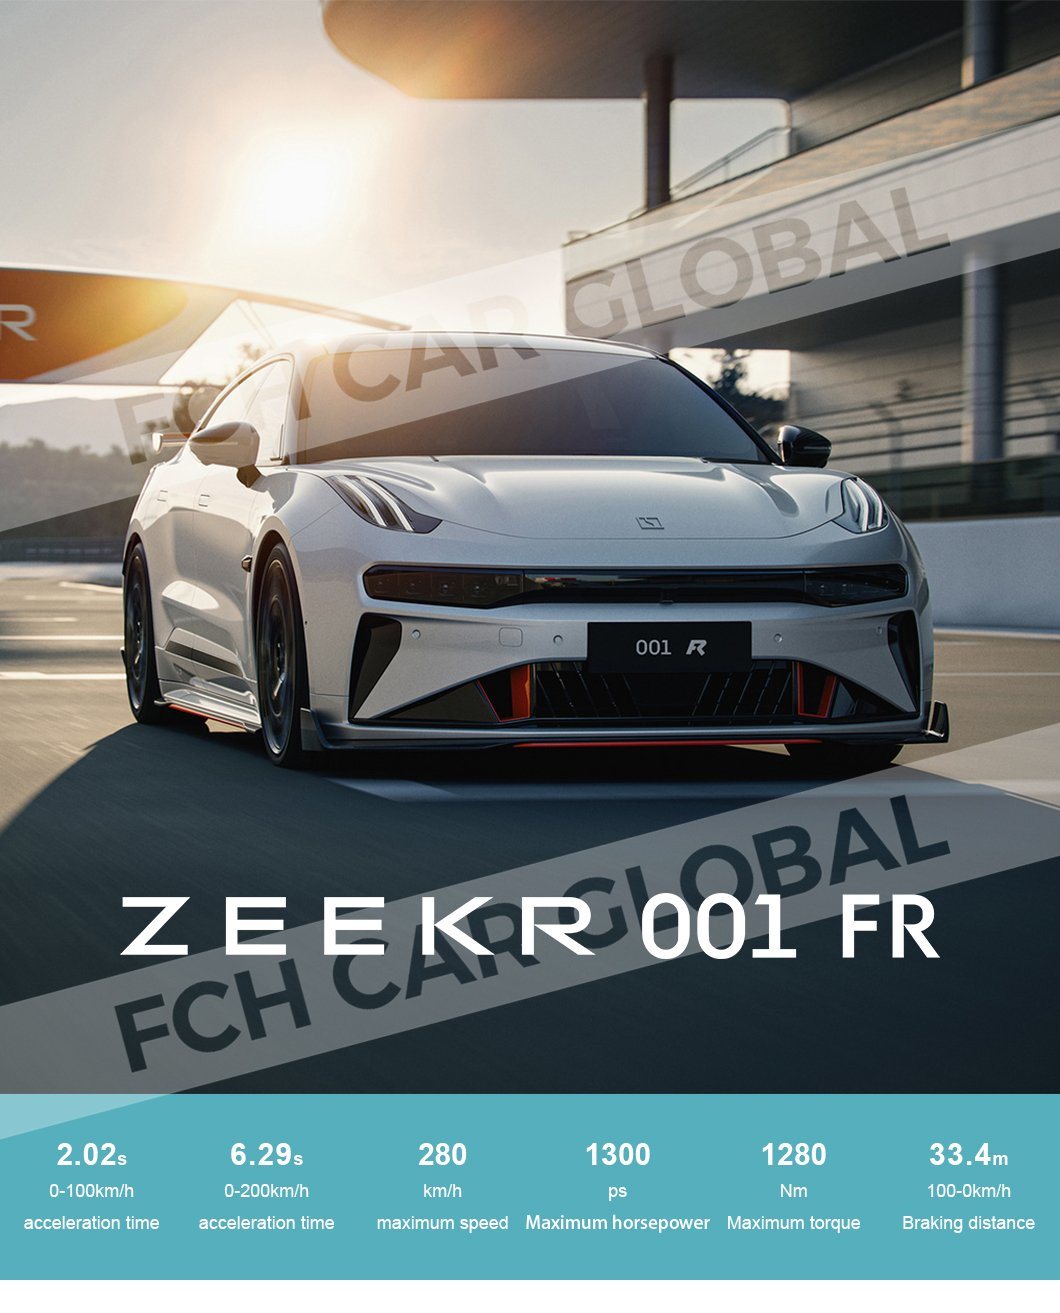 New Zeekr 001 Model Fr 4WD Edition Z-Sport 100kwh 5 Seats 0.25h Fast Charging with High Performance